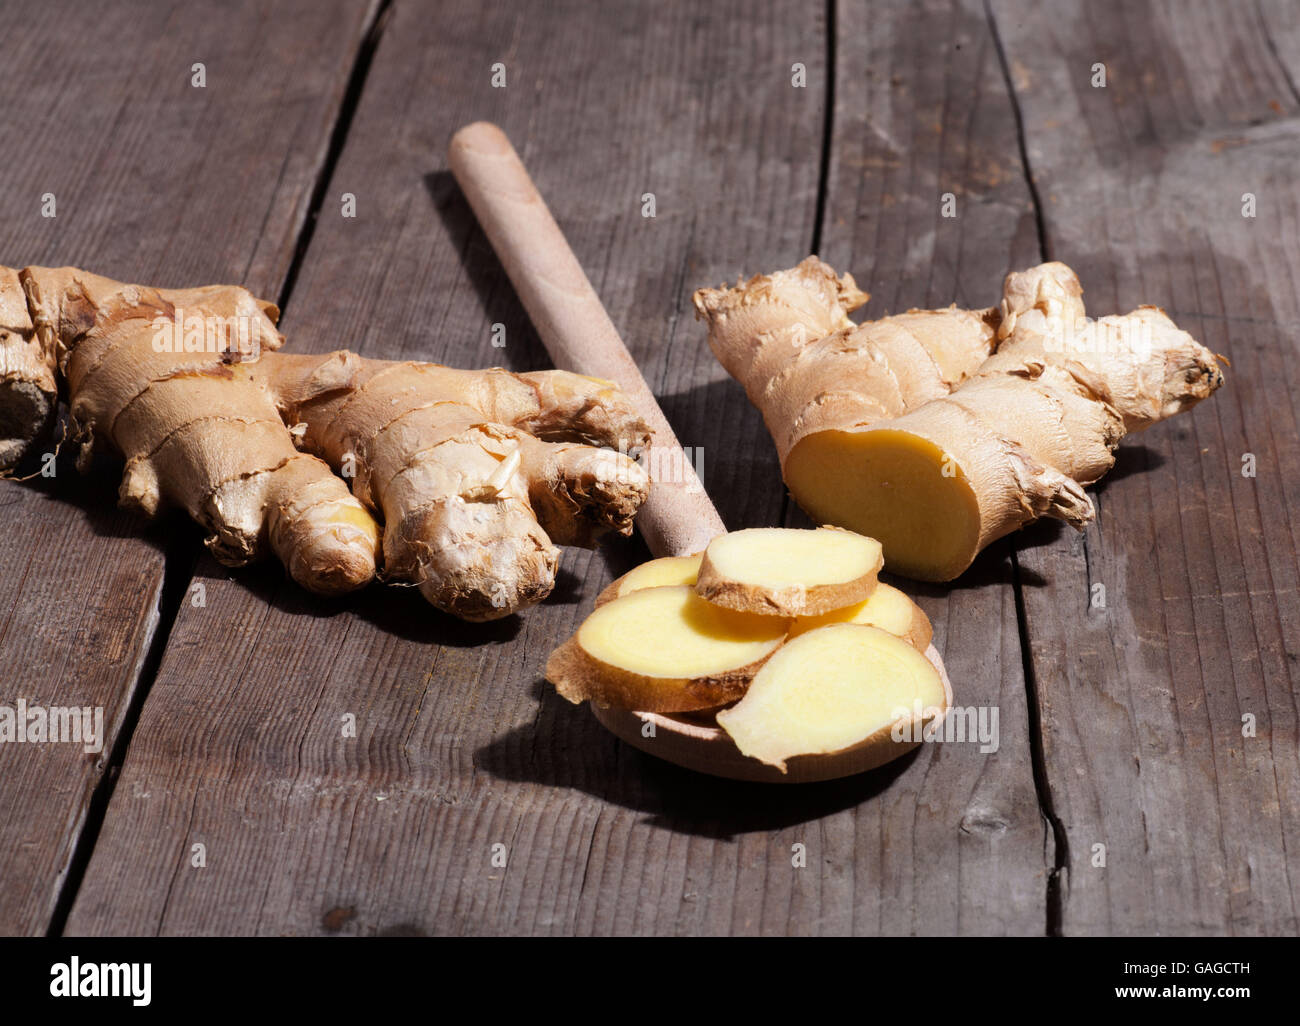 Ginger slices on wooden board Stock Photo